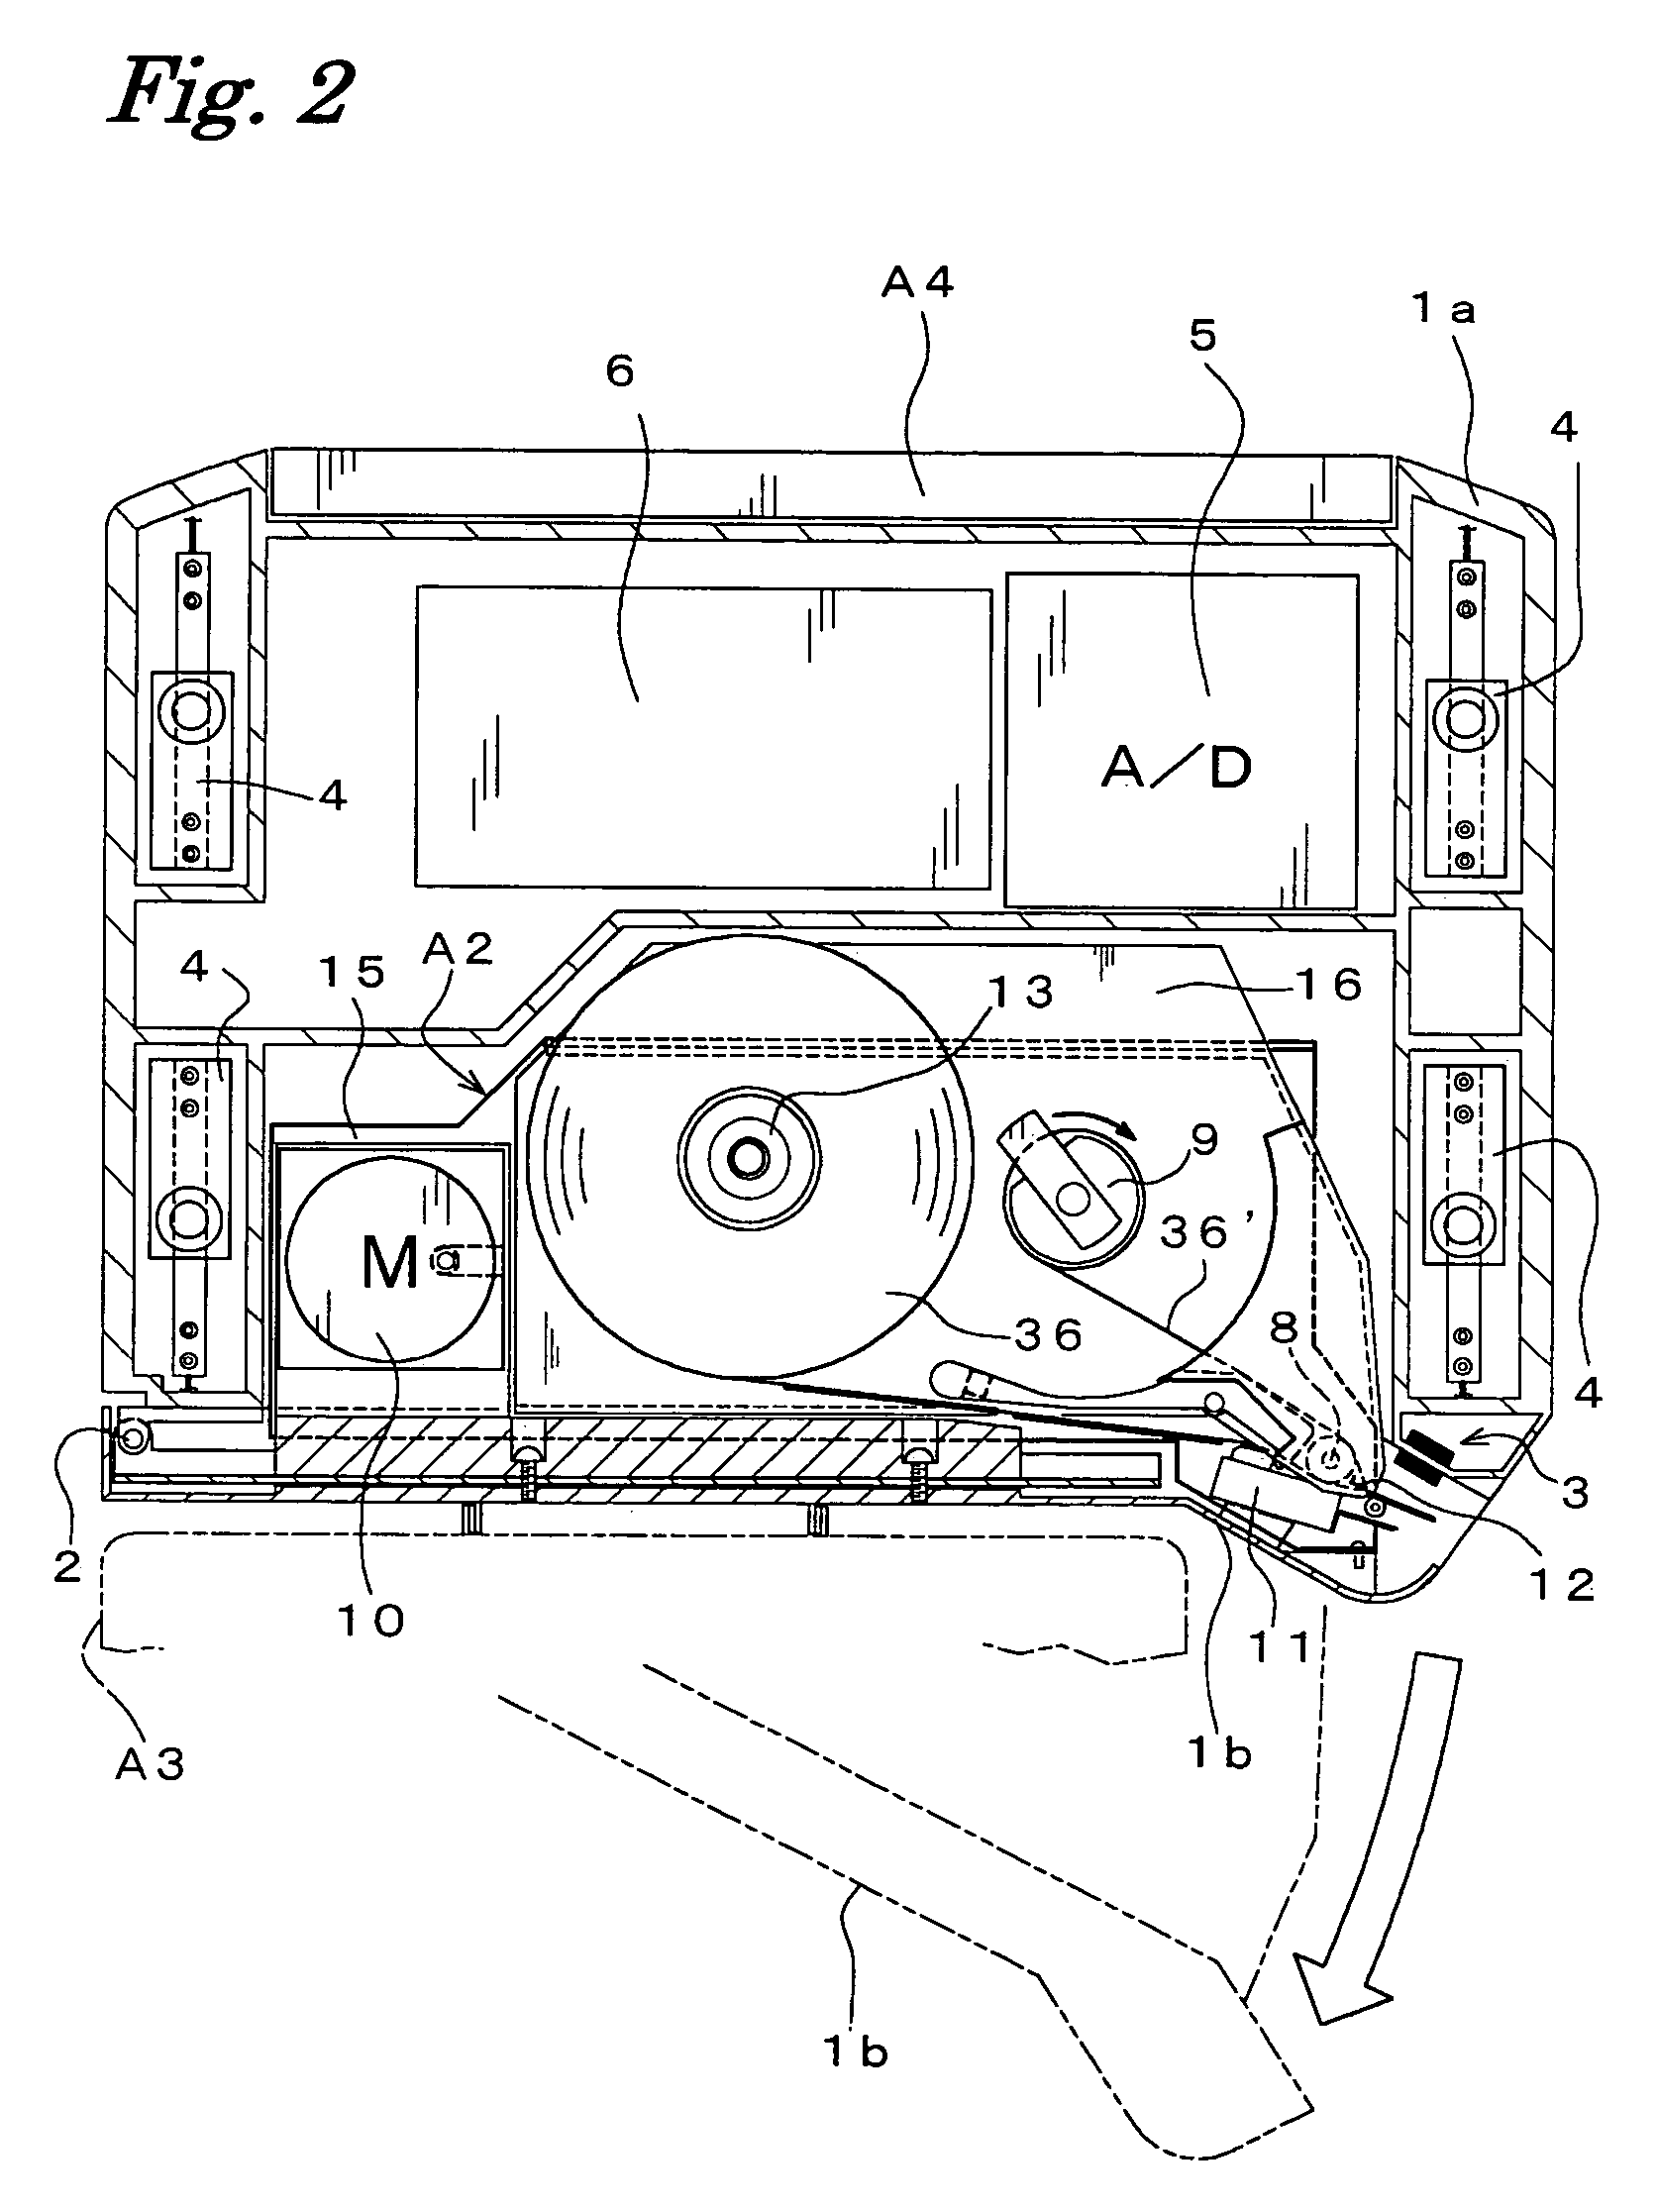 Measuring and printing device